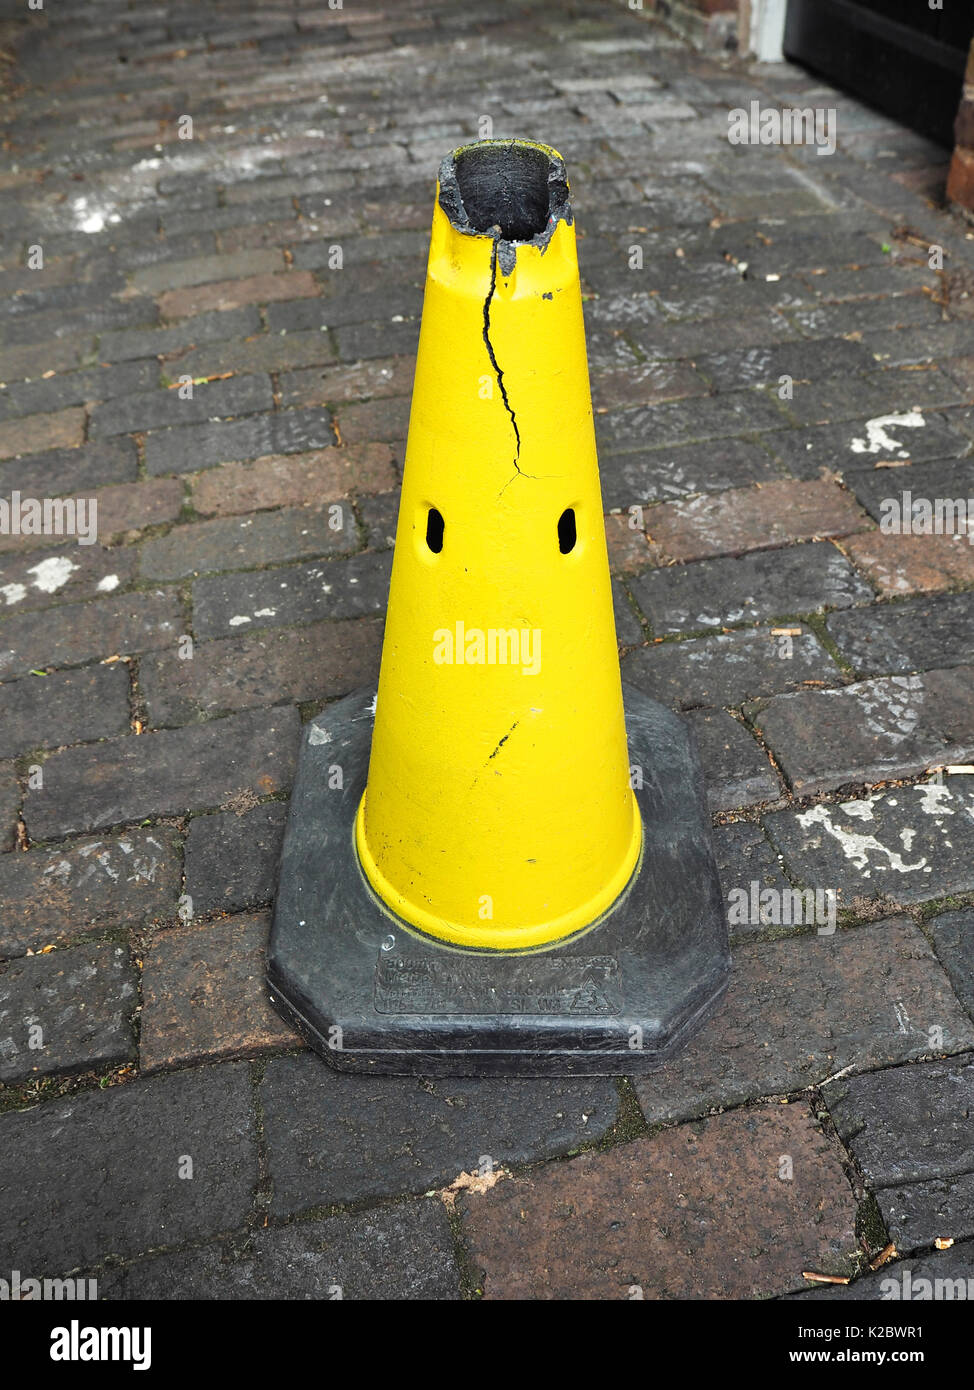 A yellow traffic cone that looks like a face Stock Photo